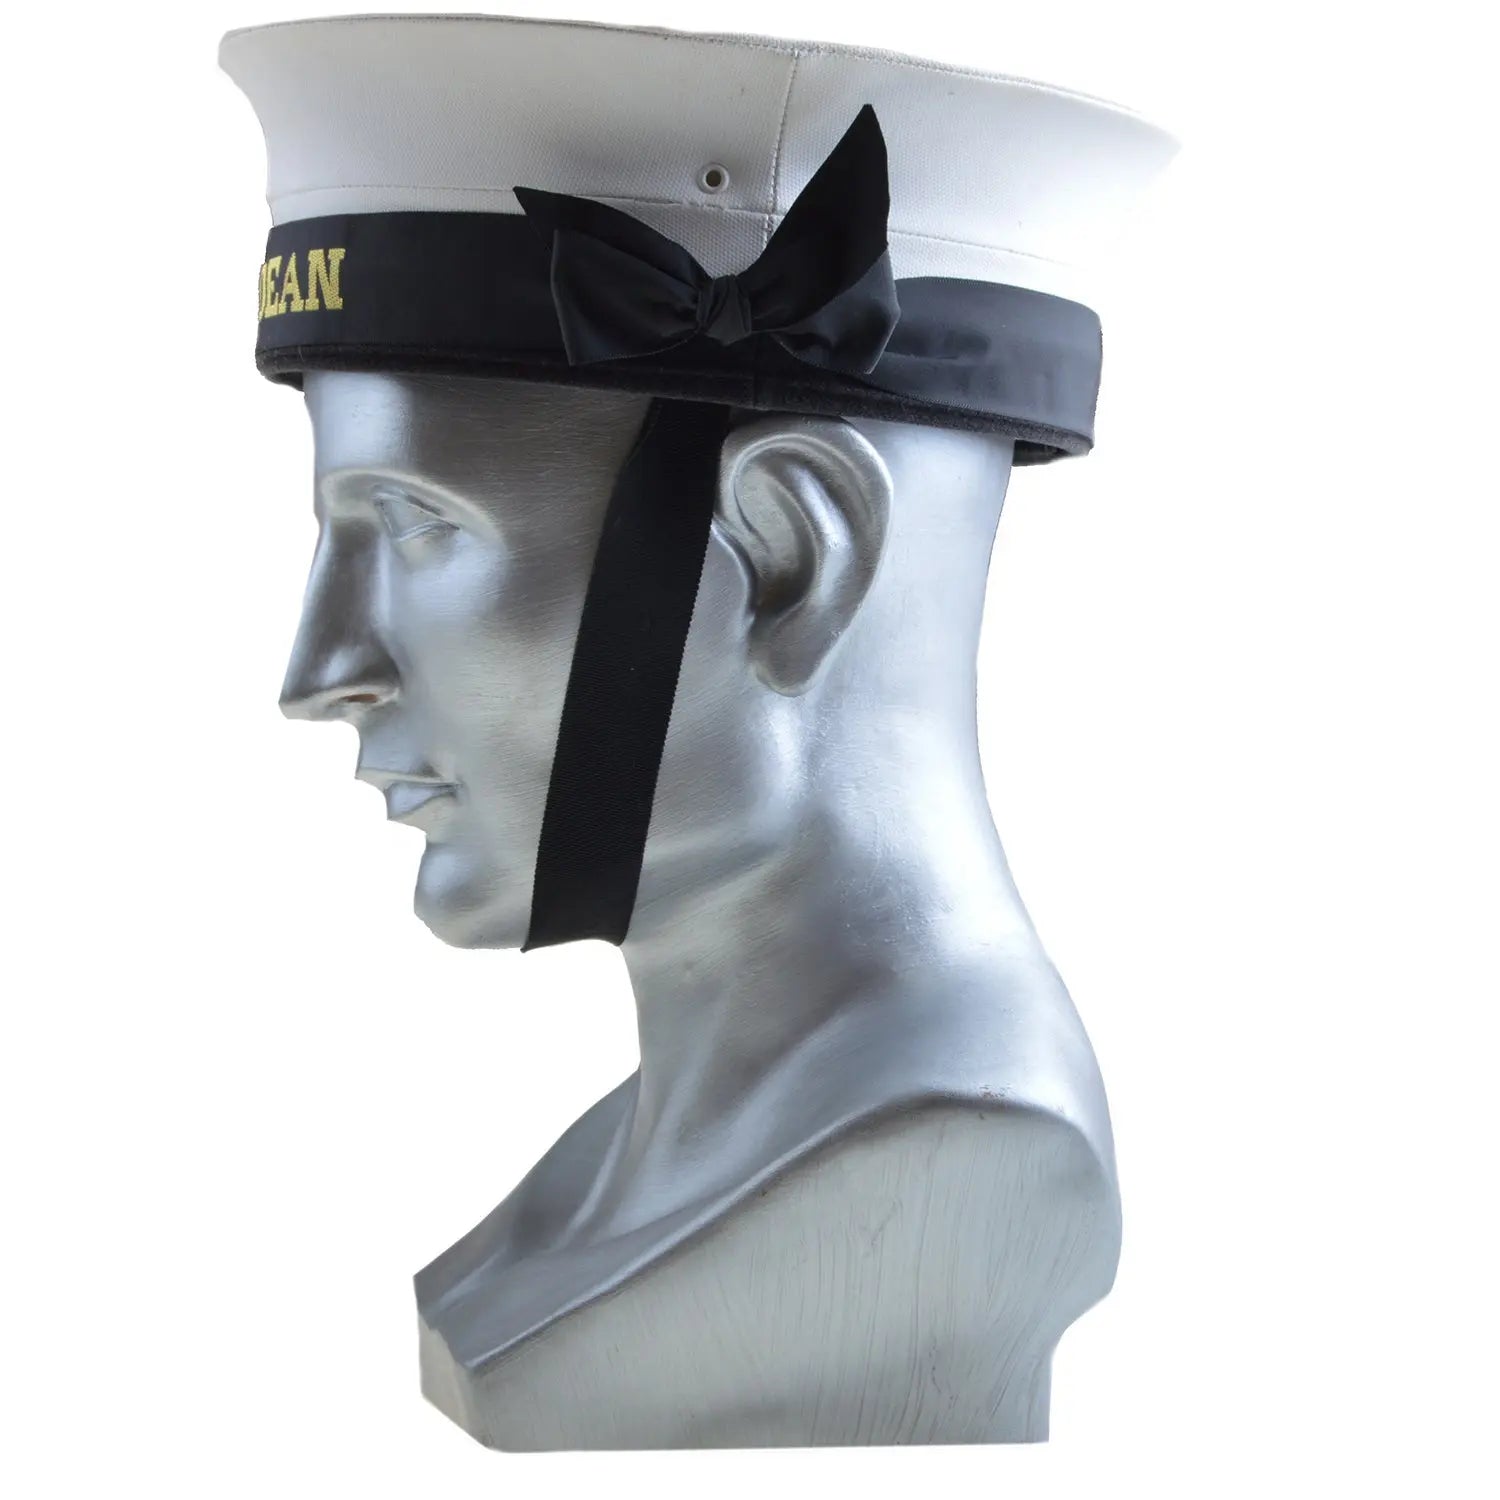 Defence Medical Group South East Cap Tally DMG South East Cap Tally Royal Navy wyedean